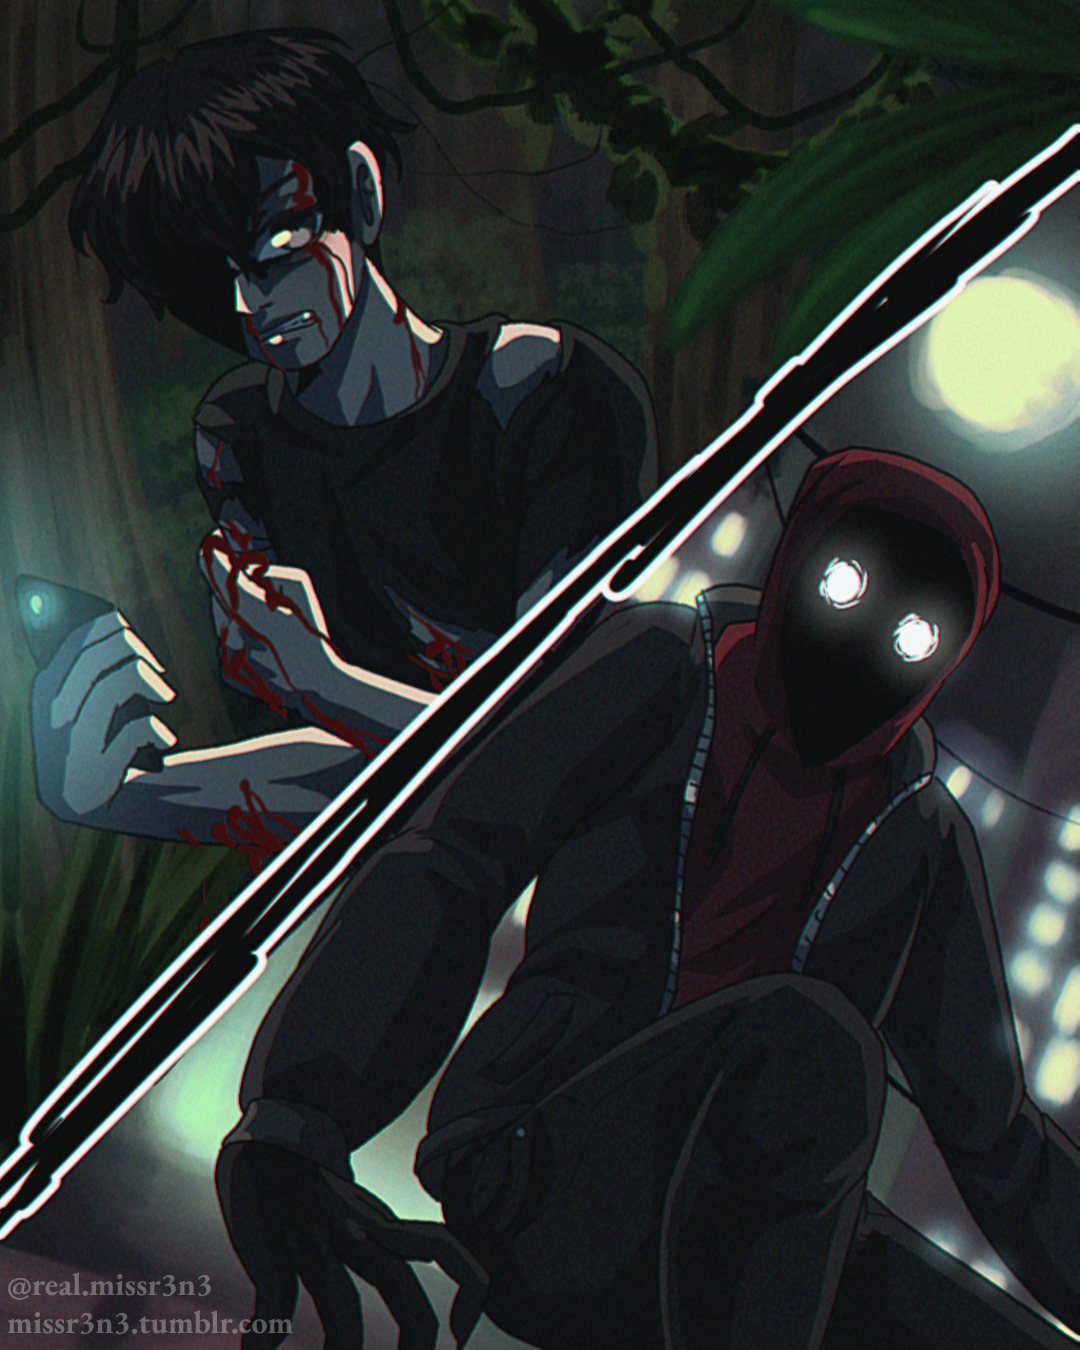 two panels of the personas edm producer danger uses. the left panel depicts a pale man covered in blood walking through a jungle. he uses the light of his cellphone to navigate. in the right panel is a shadow creature with beedy white eyes. they're dressed in techwear and are sitting on a wall brick wall, the lights of a city visible behind them